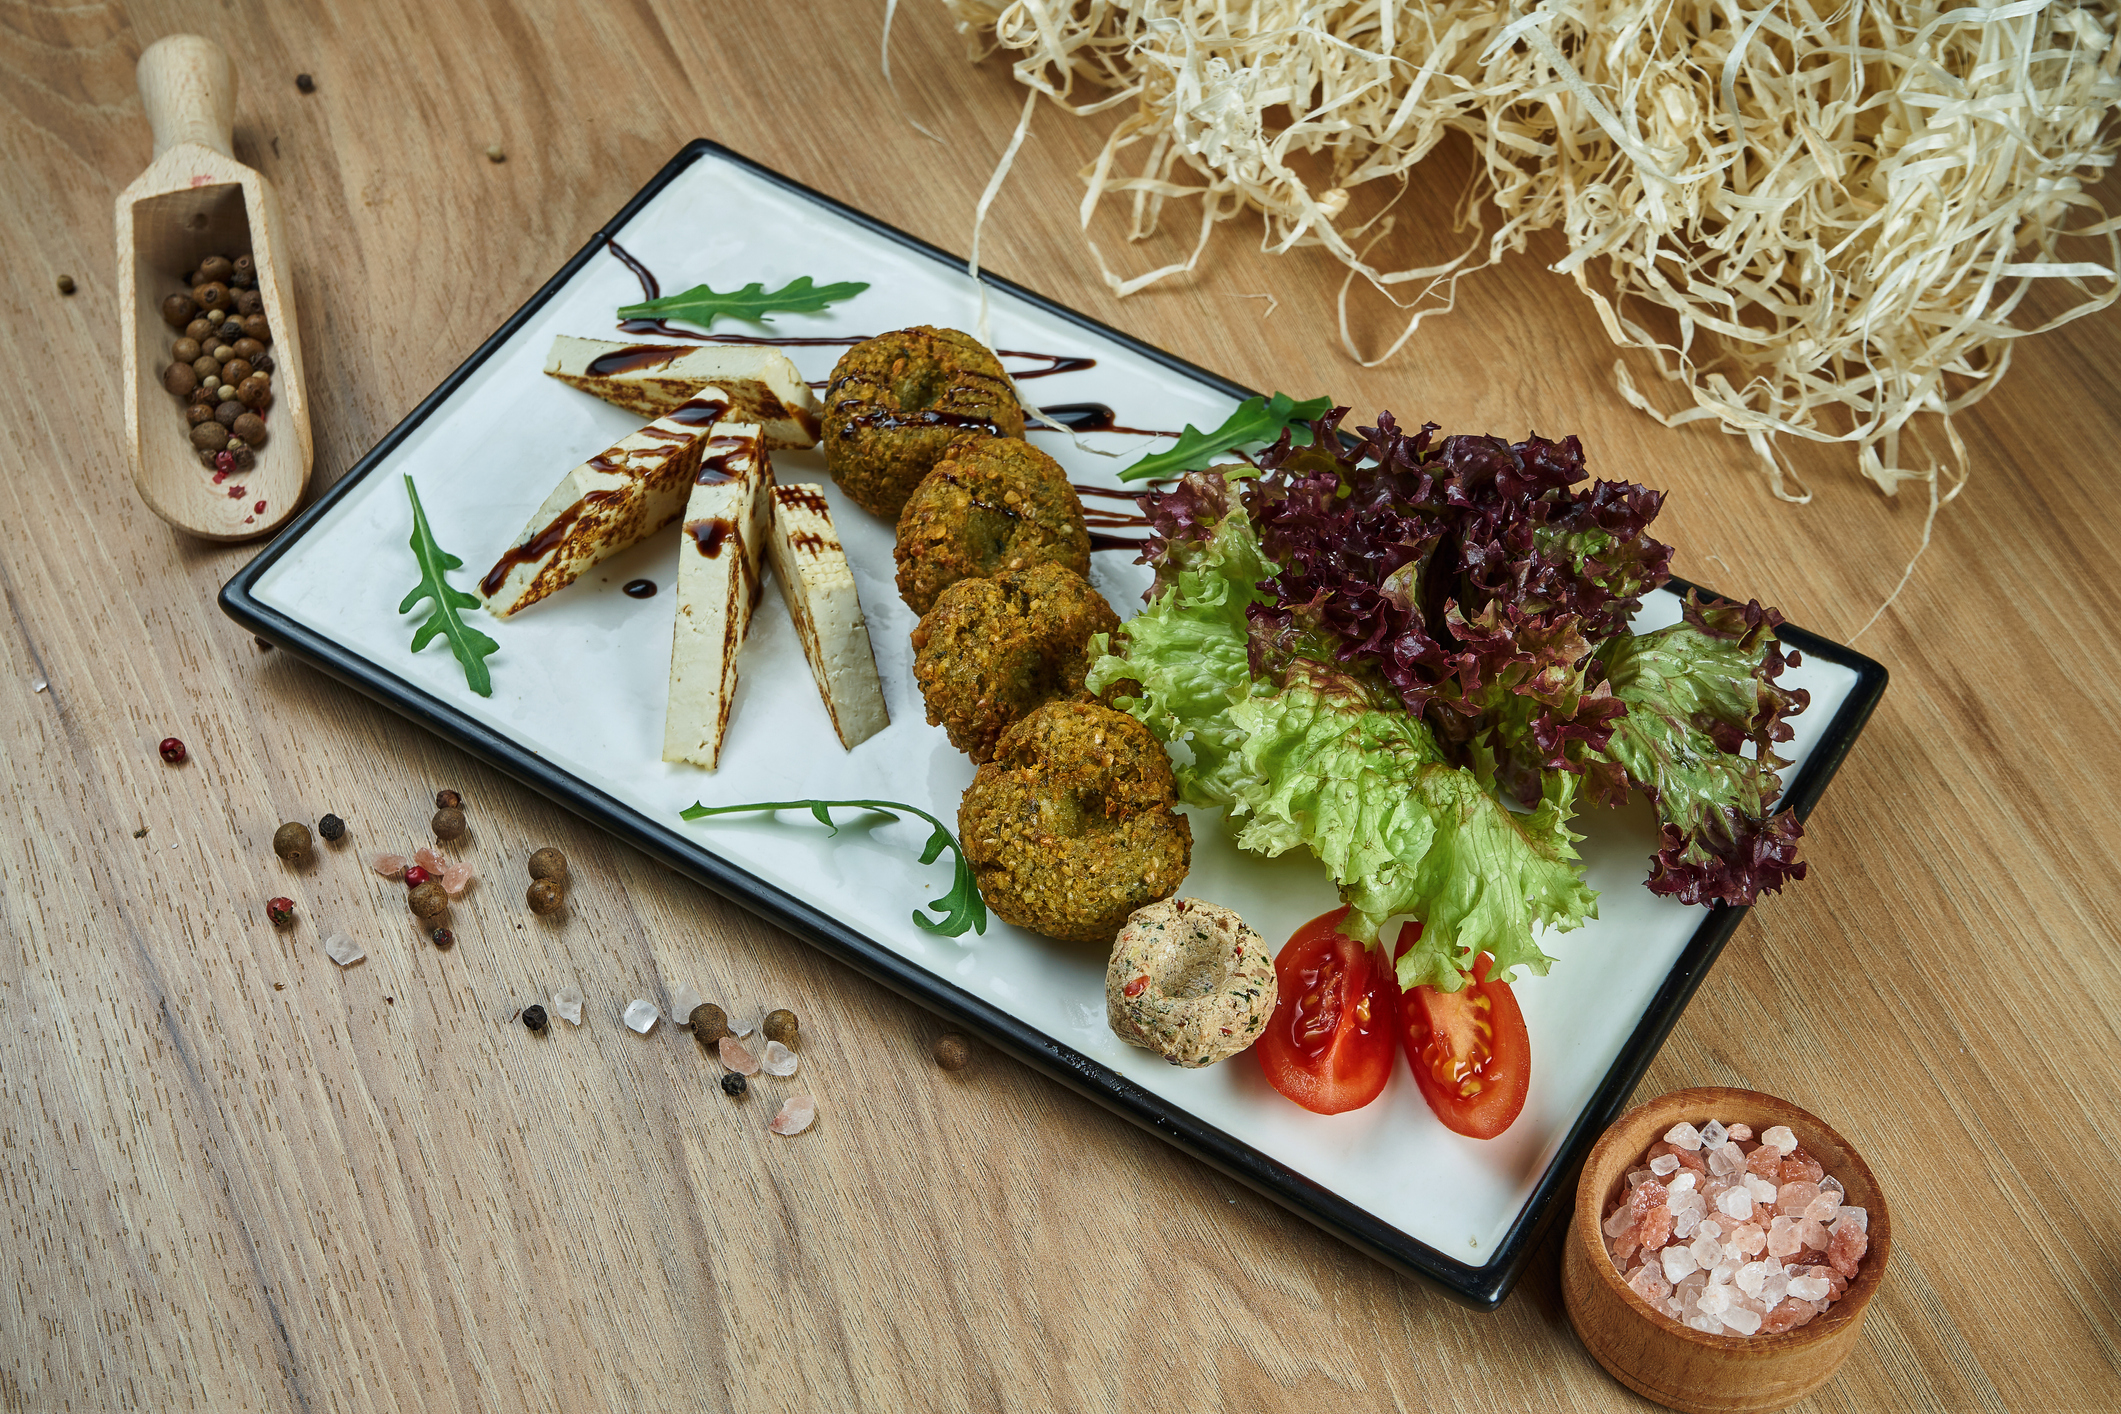 Falafel served on a plate with fresh greens.